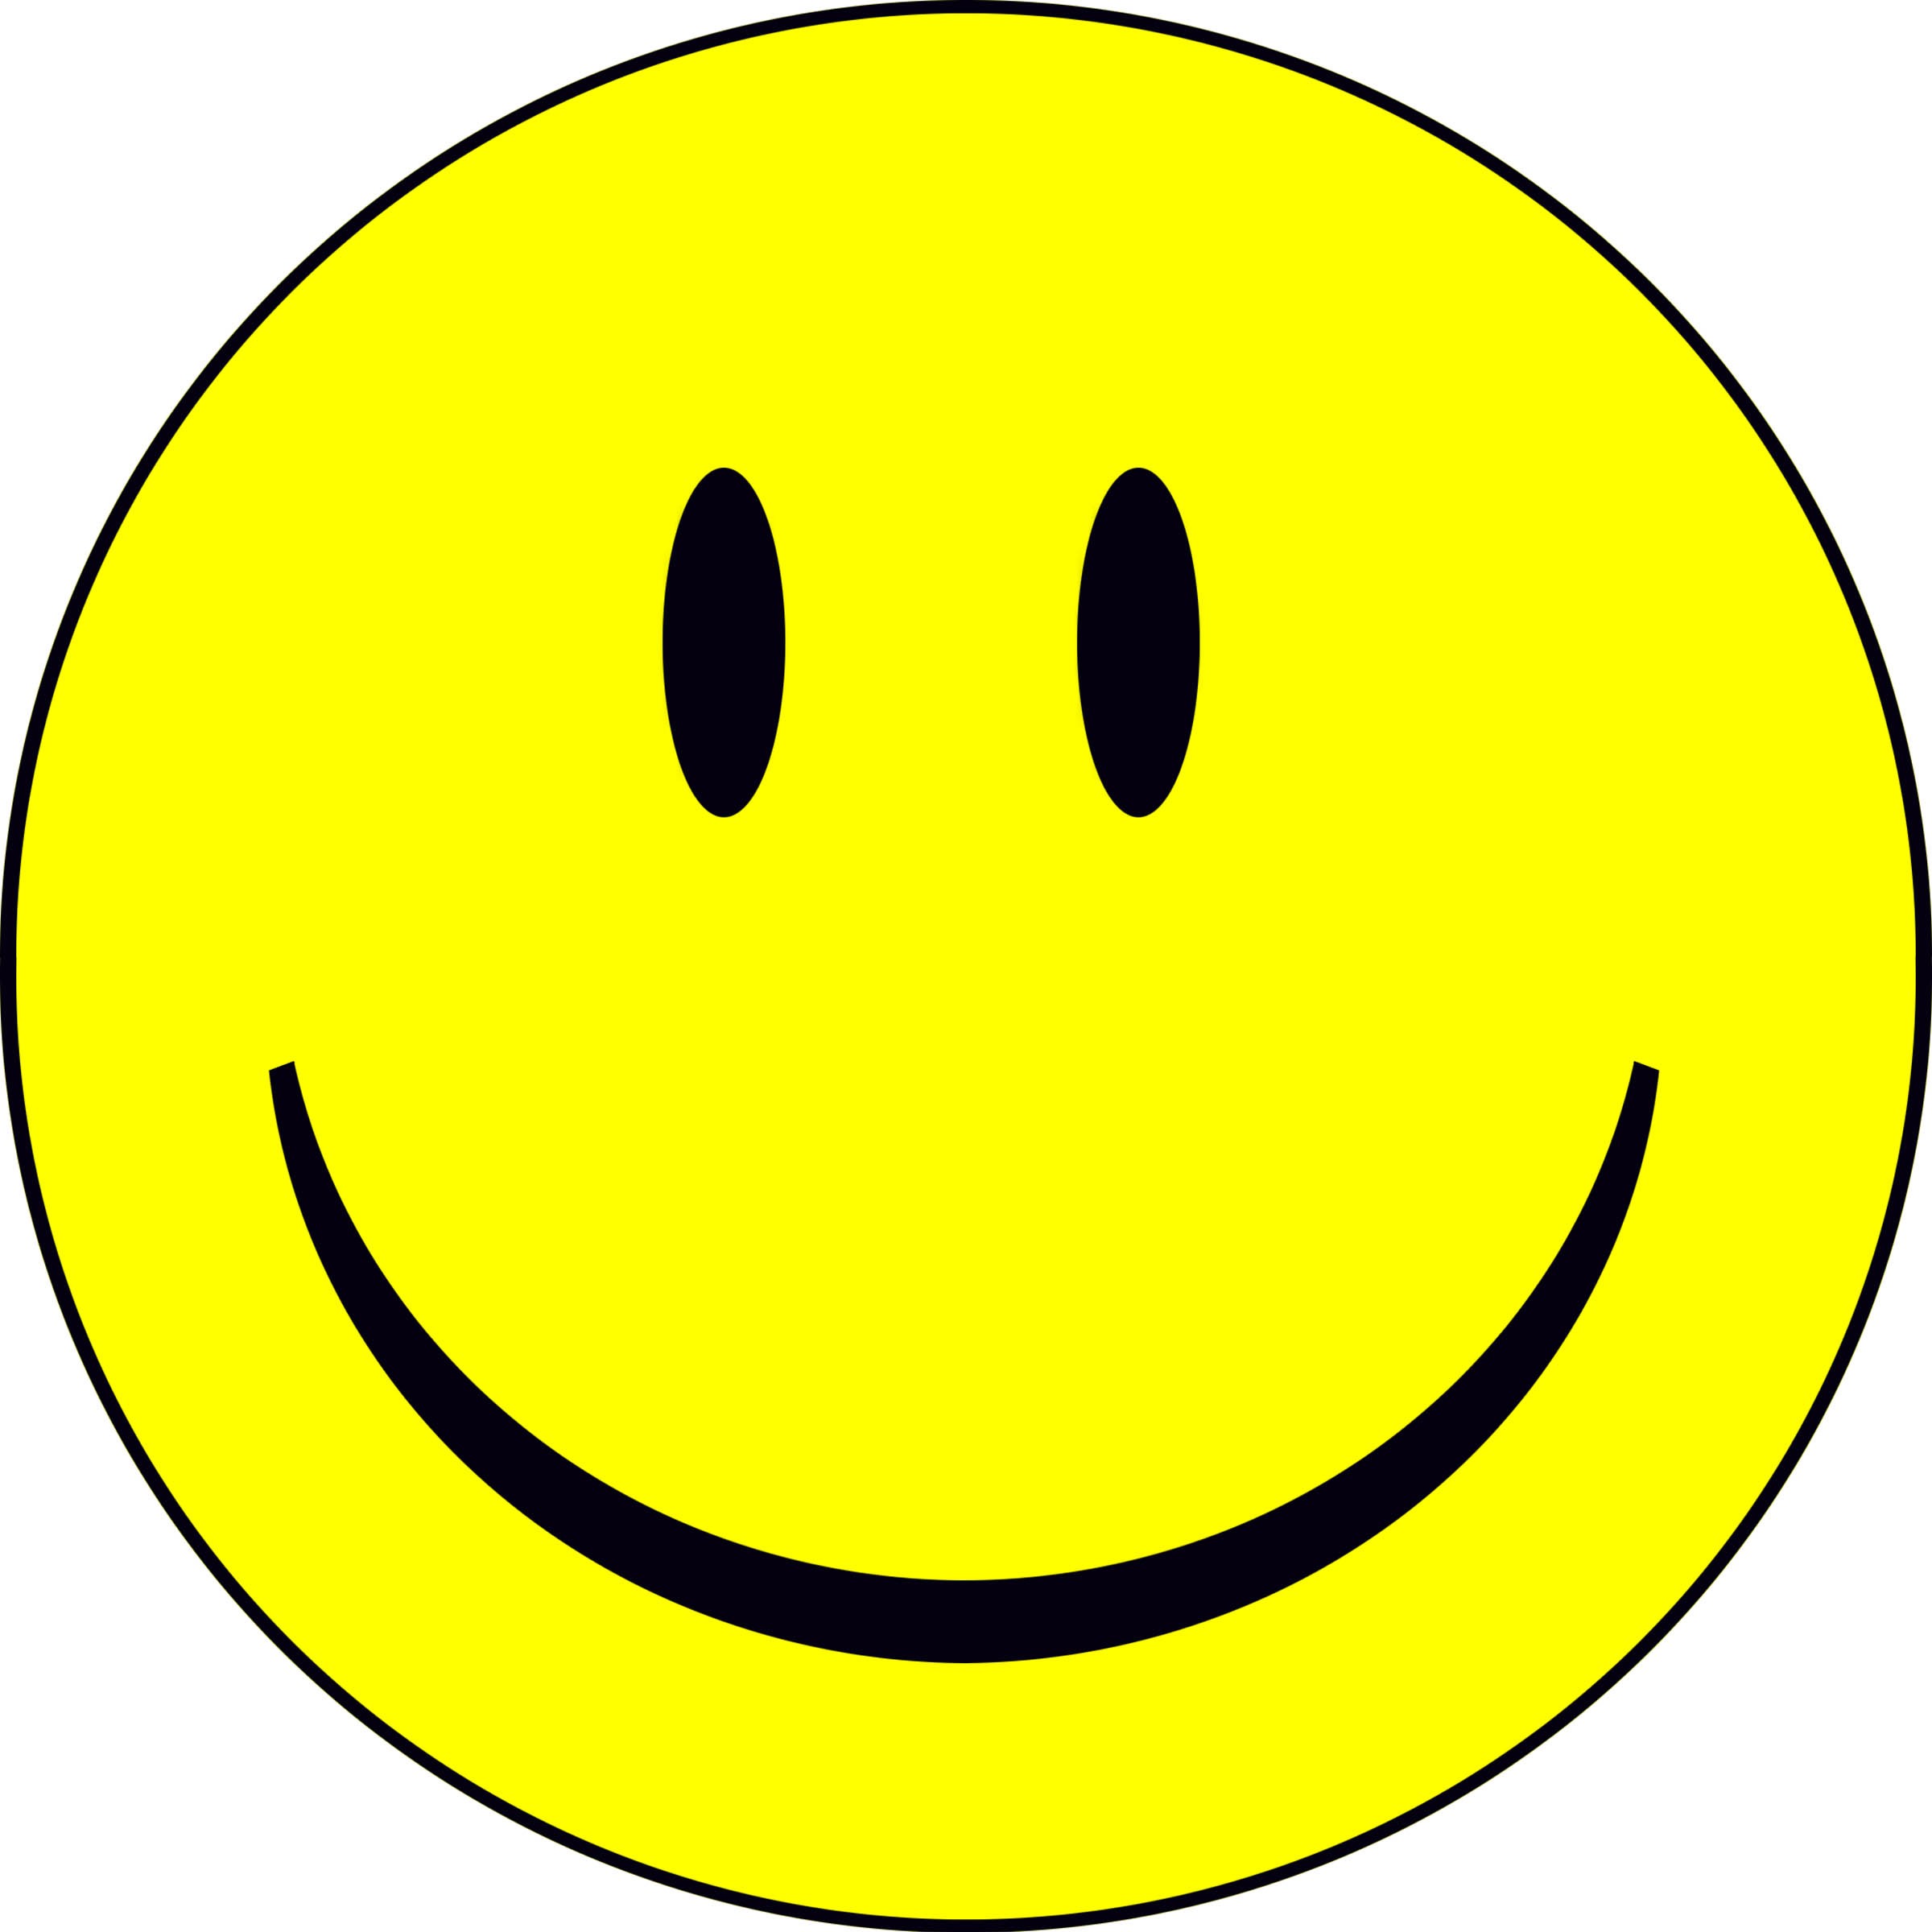 Happy face clipart smiley